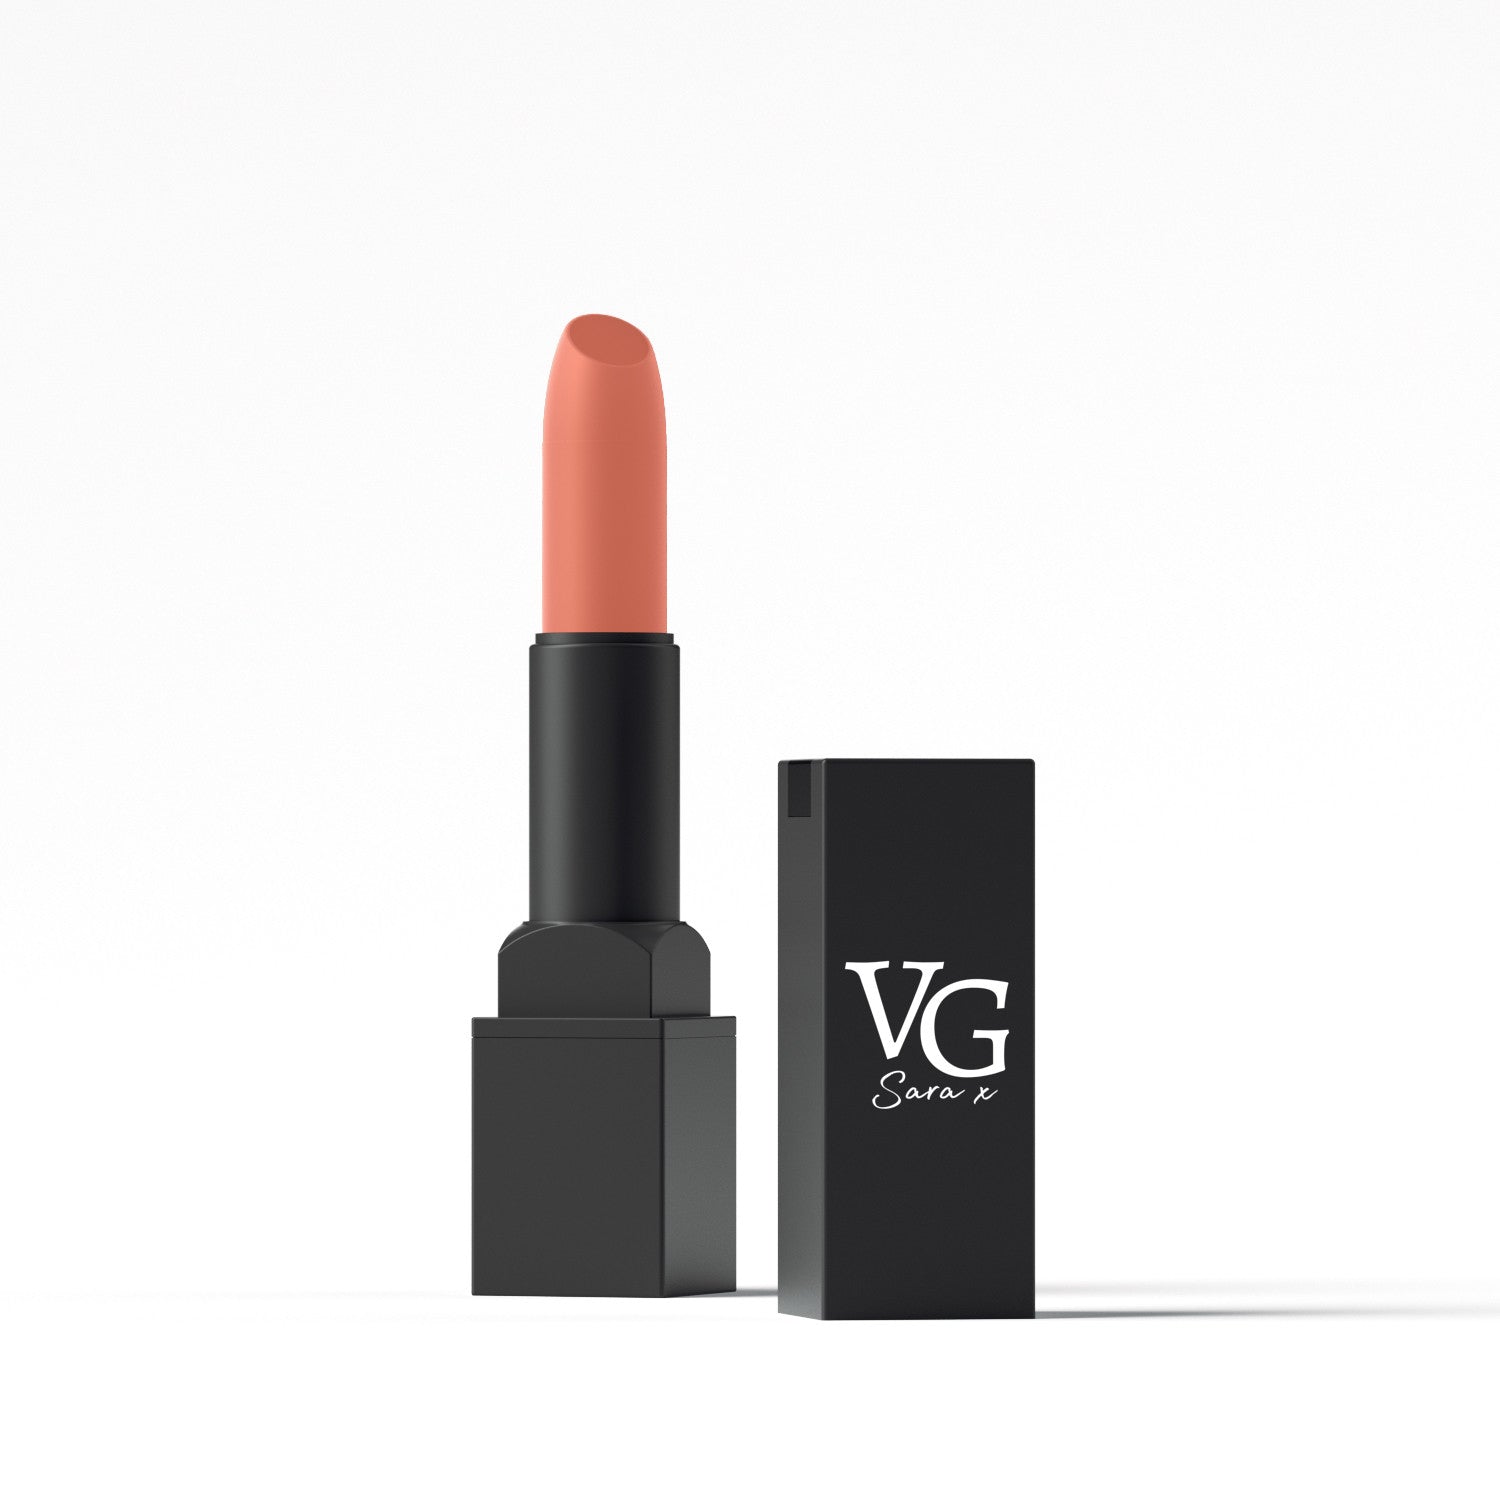 VG brand lipstick with long-lasting benefits 